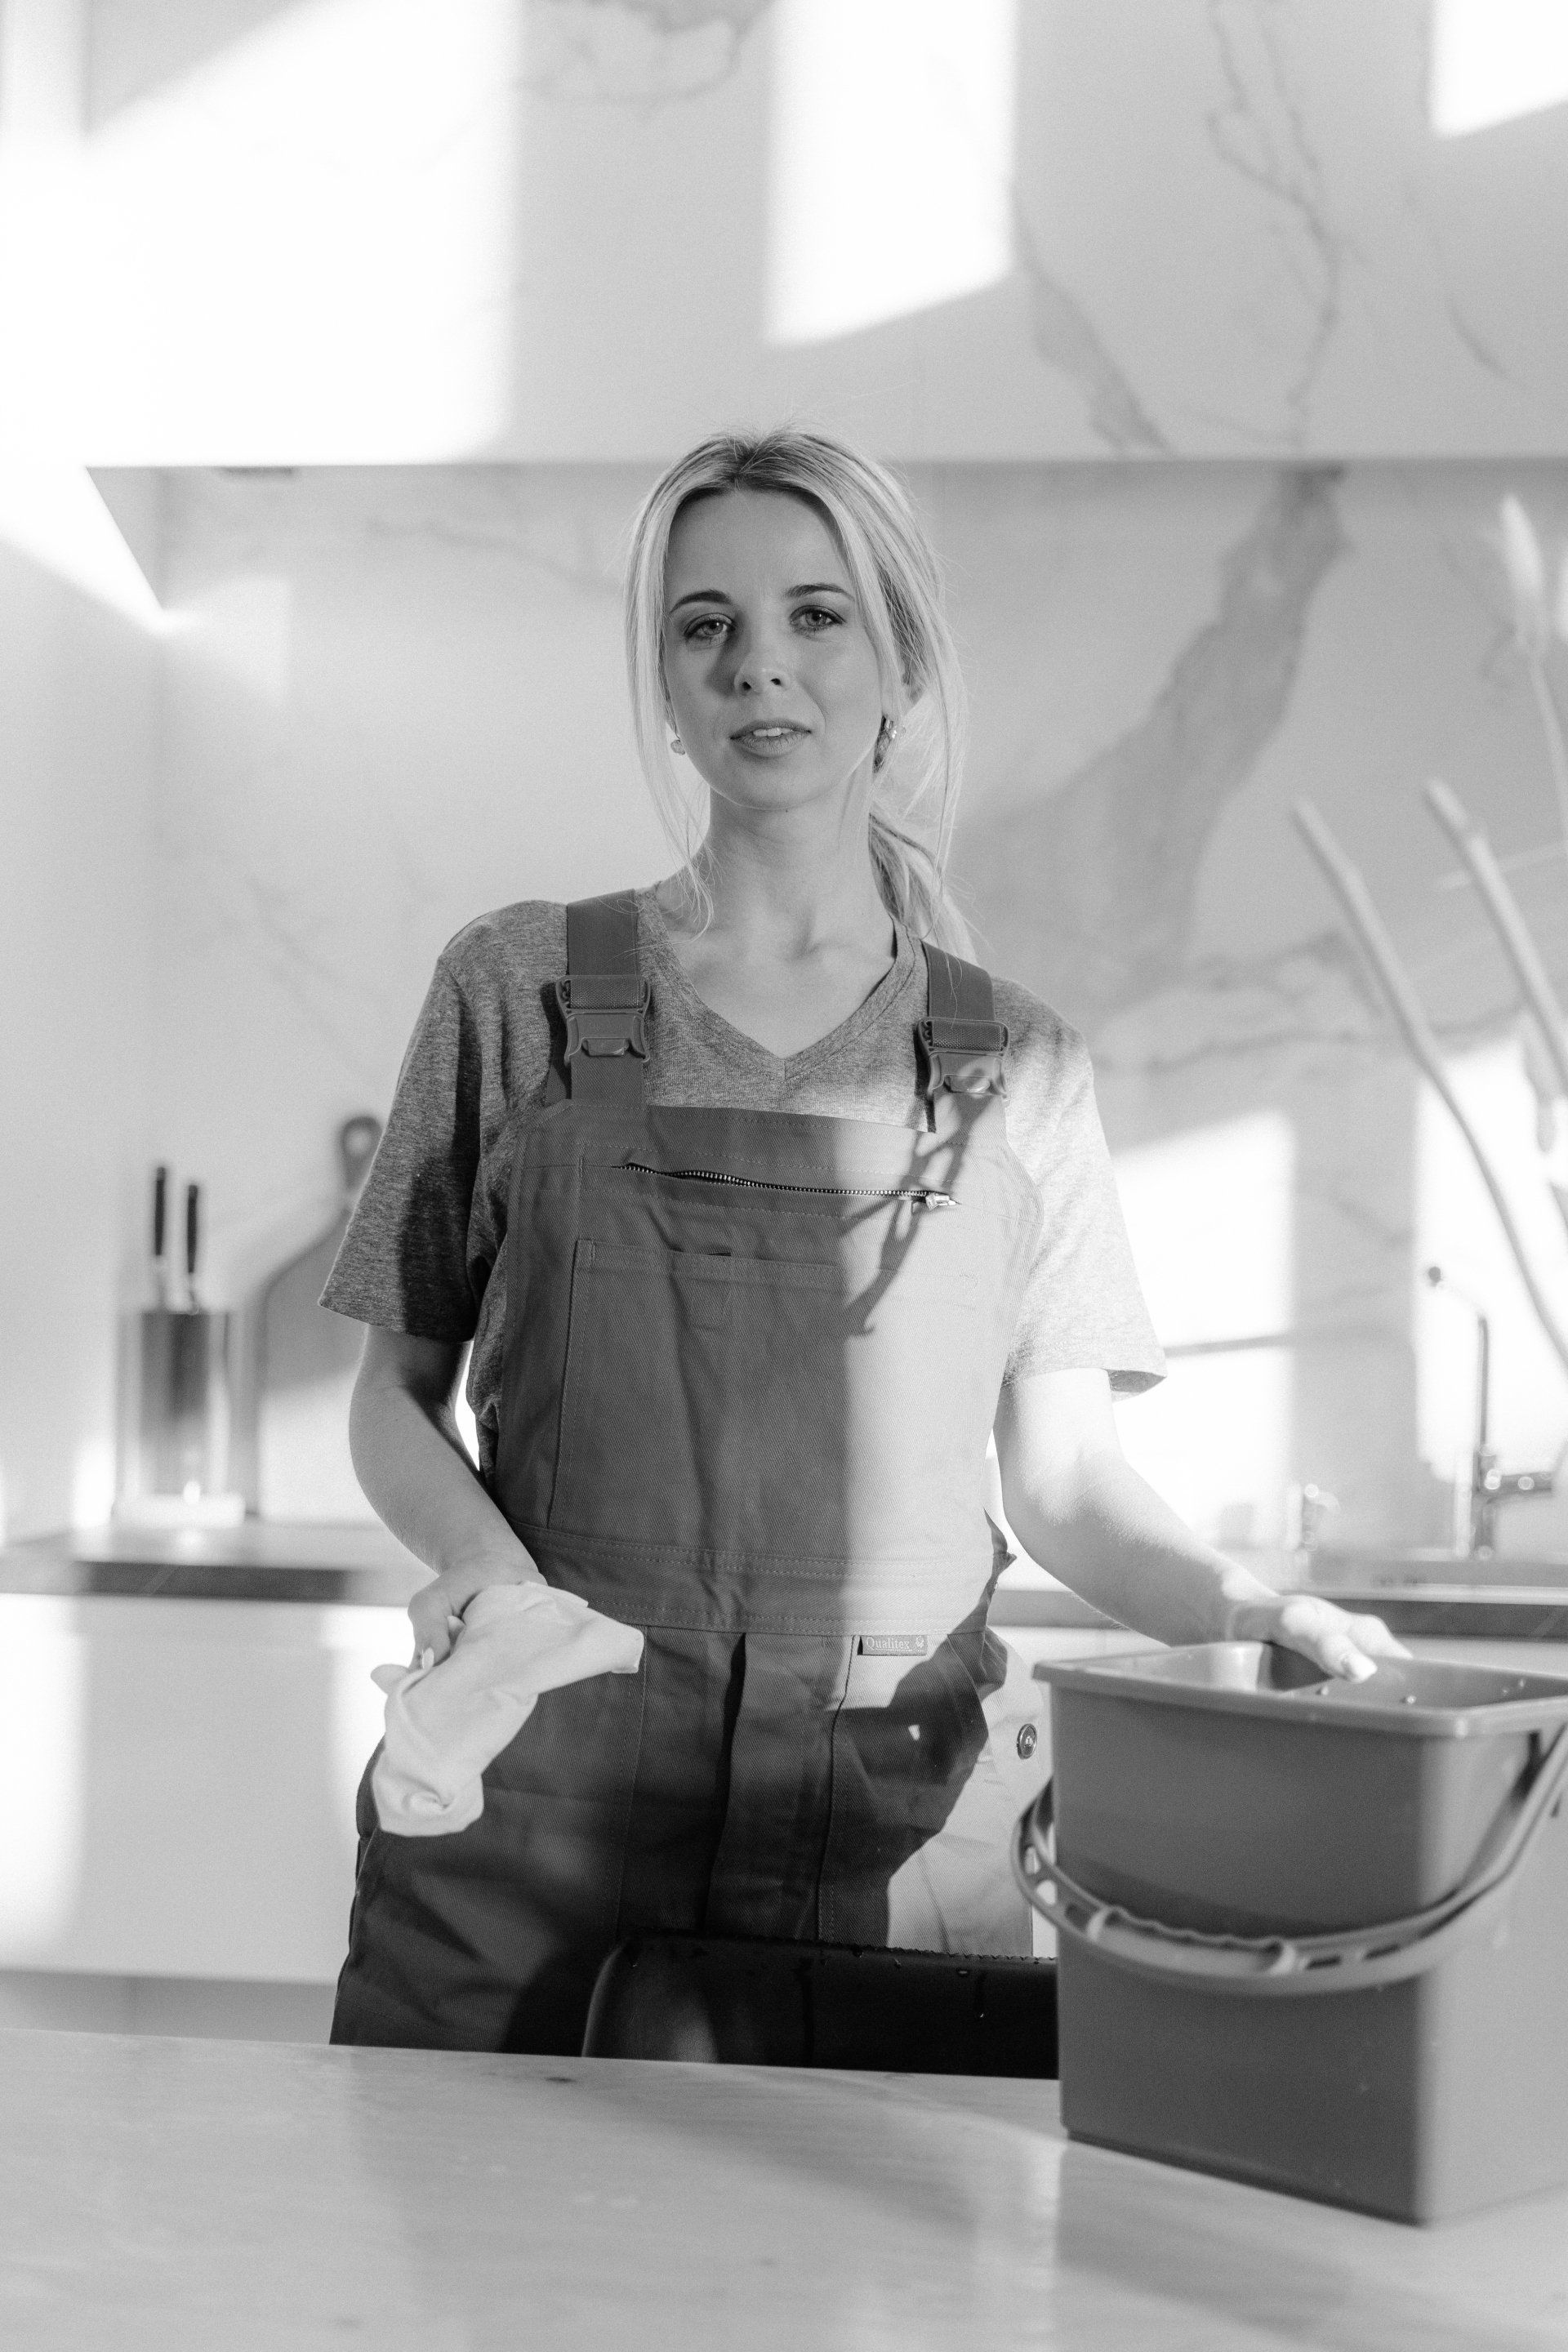 A black and white photo of a woman standing in a kitchen.